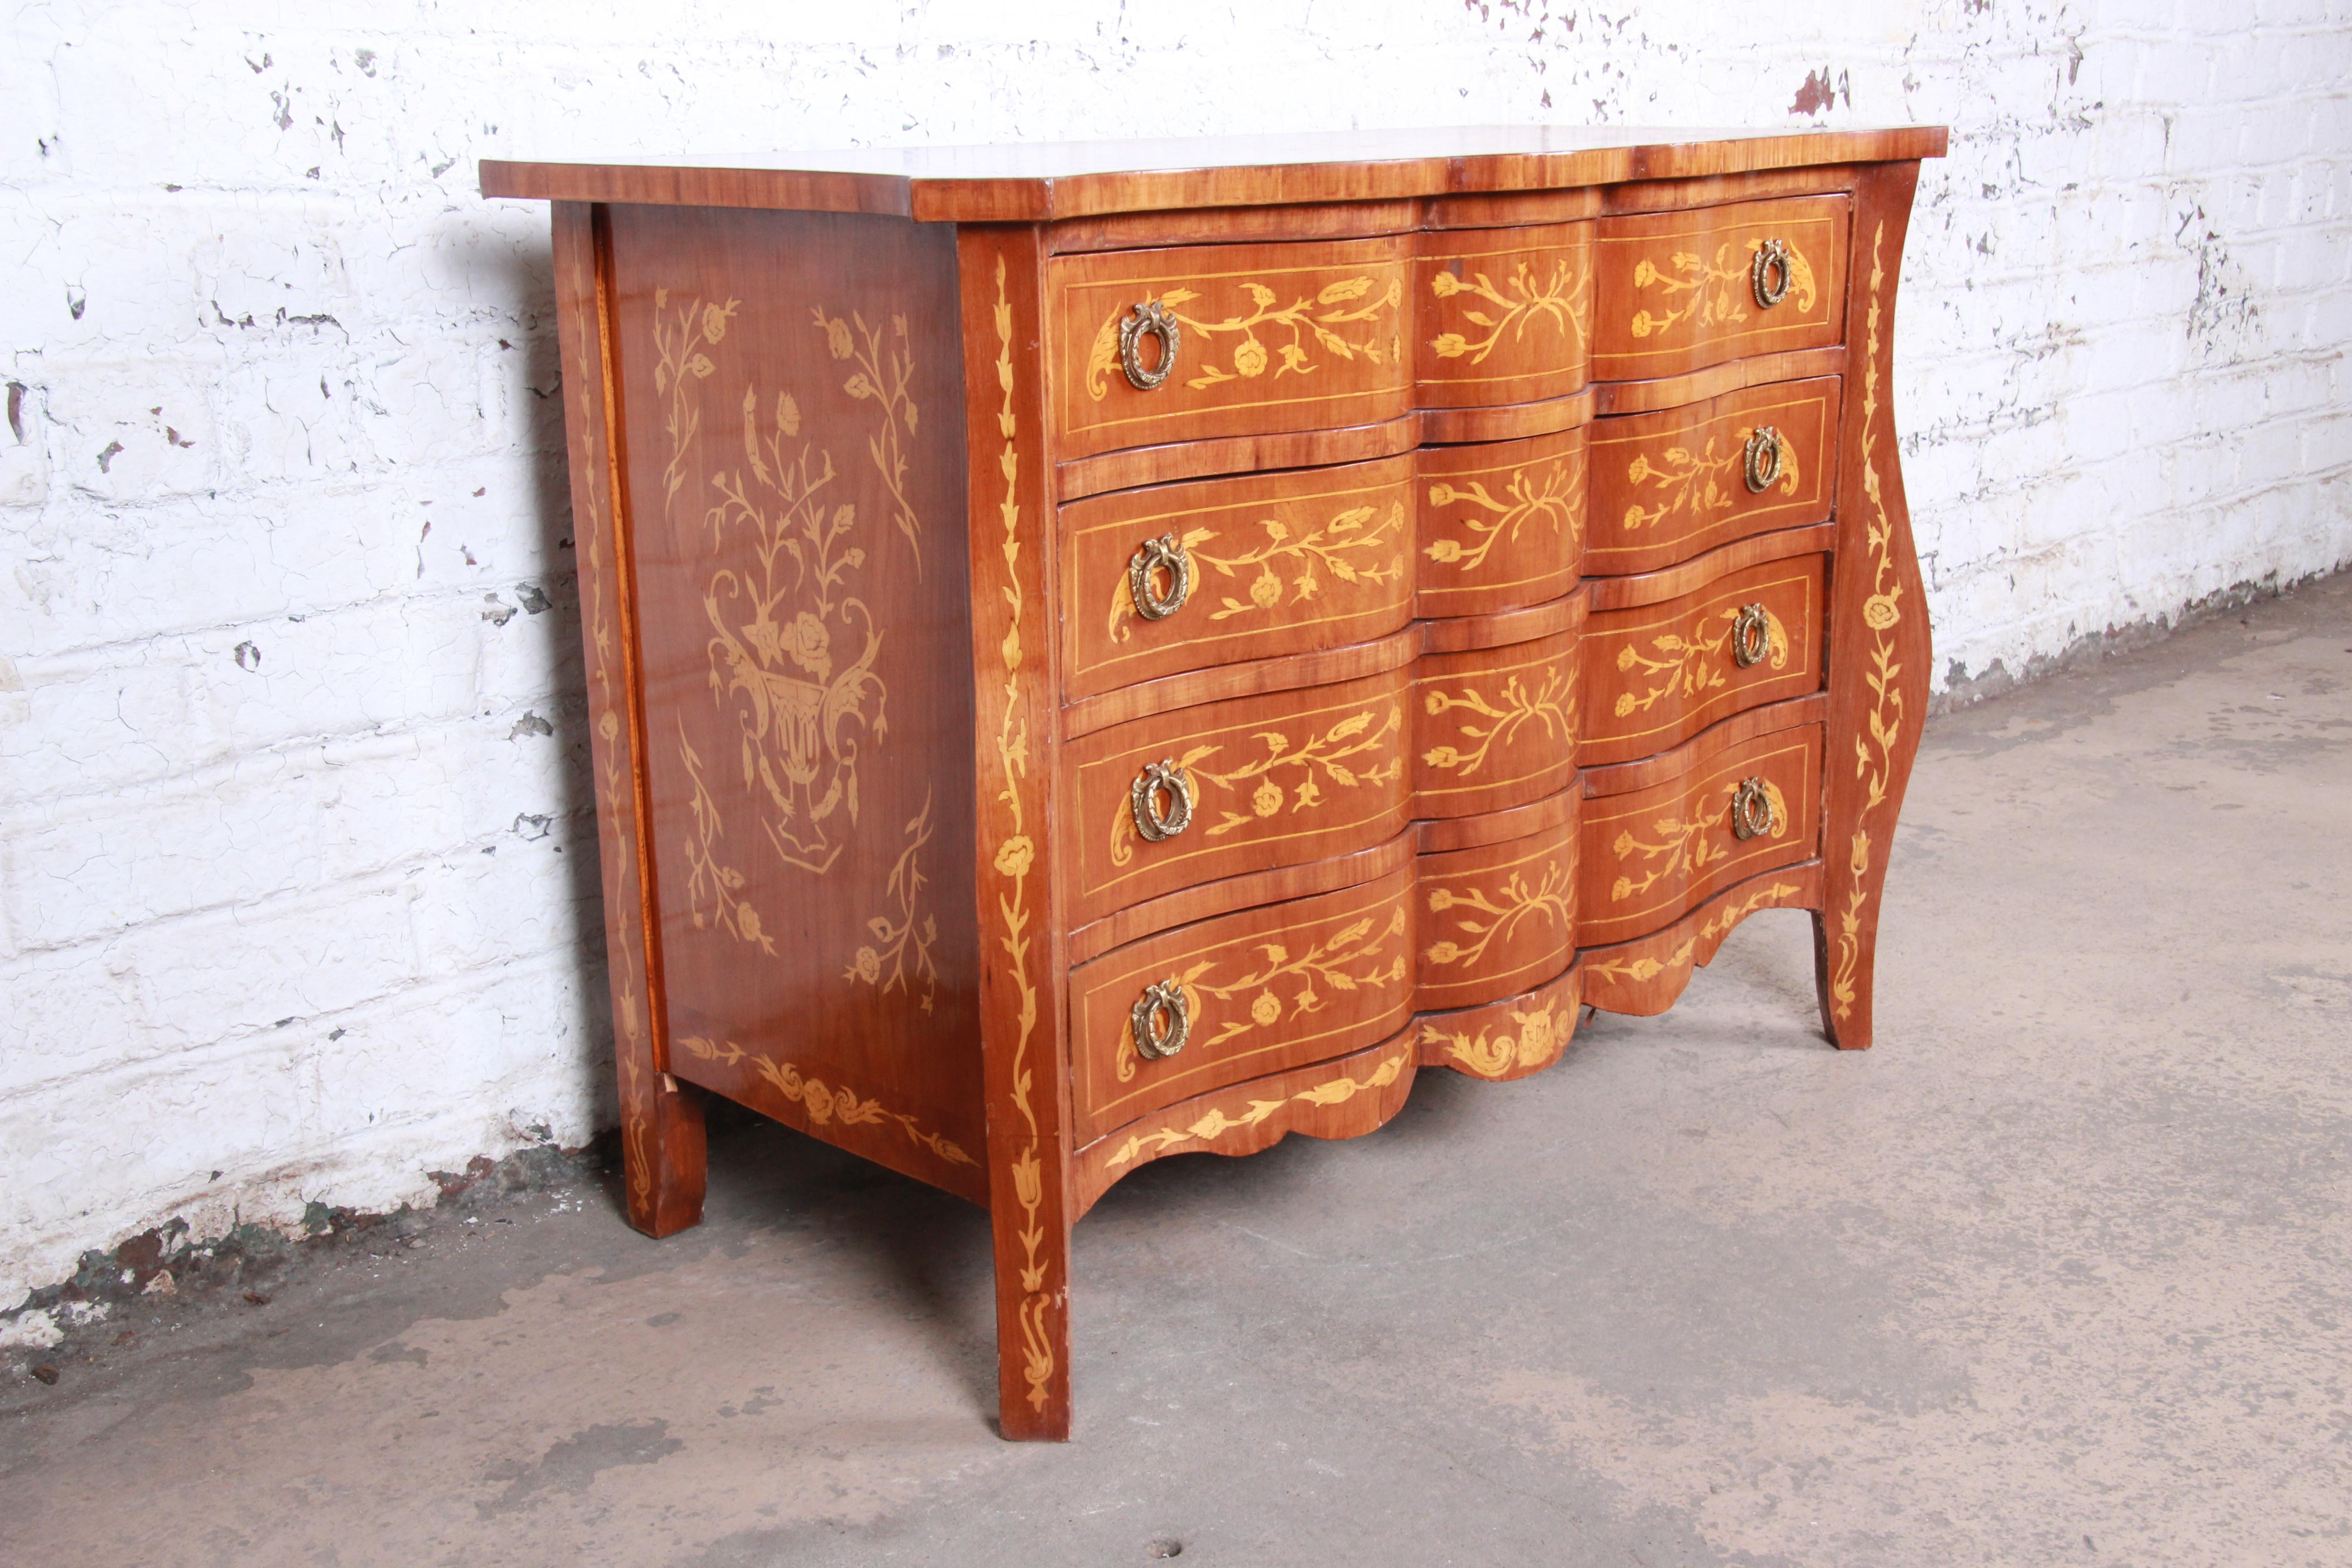 Mid-20th Century Italian Inlaid Marquetry Mahogany Chest of Drawers or Commode, circa 1930s